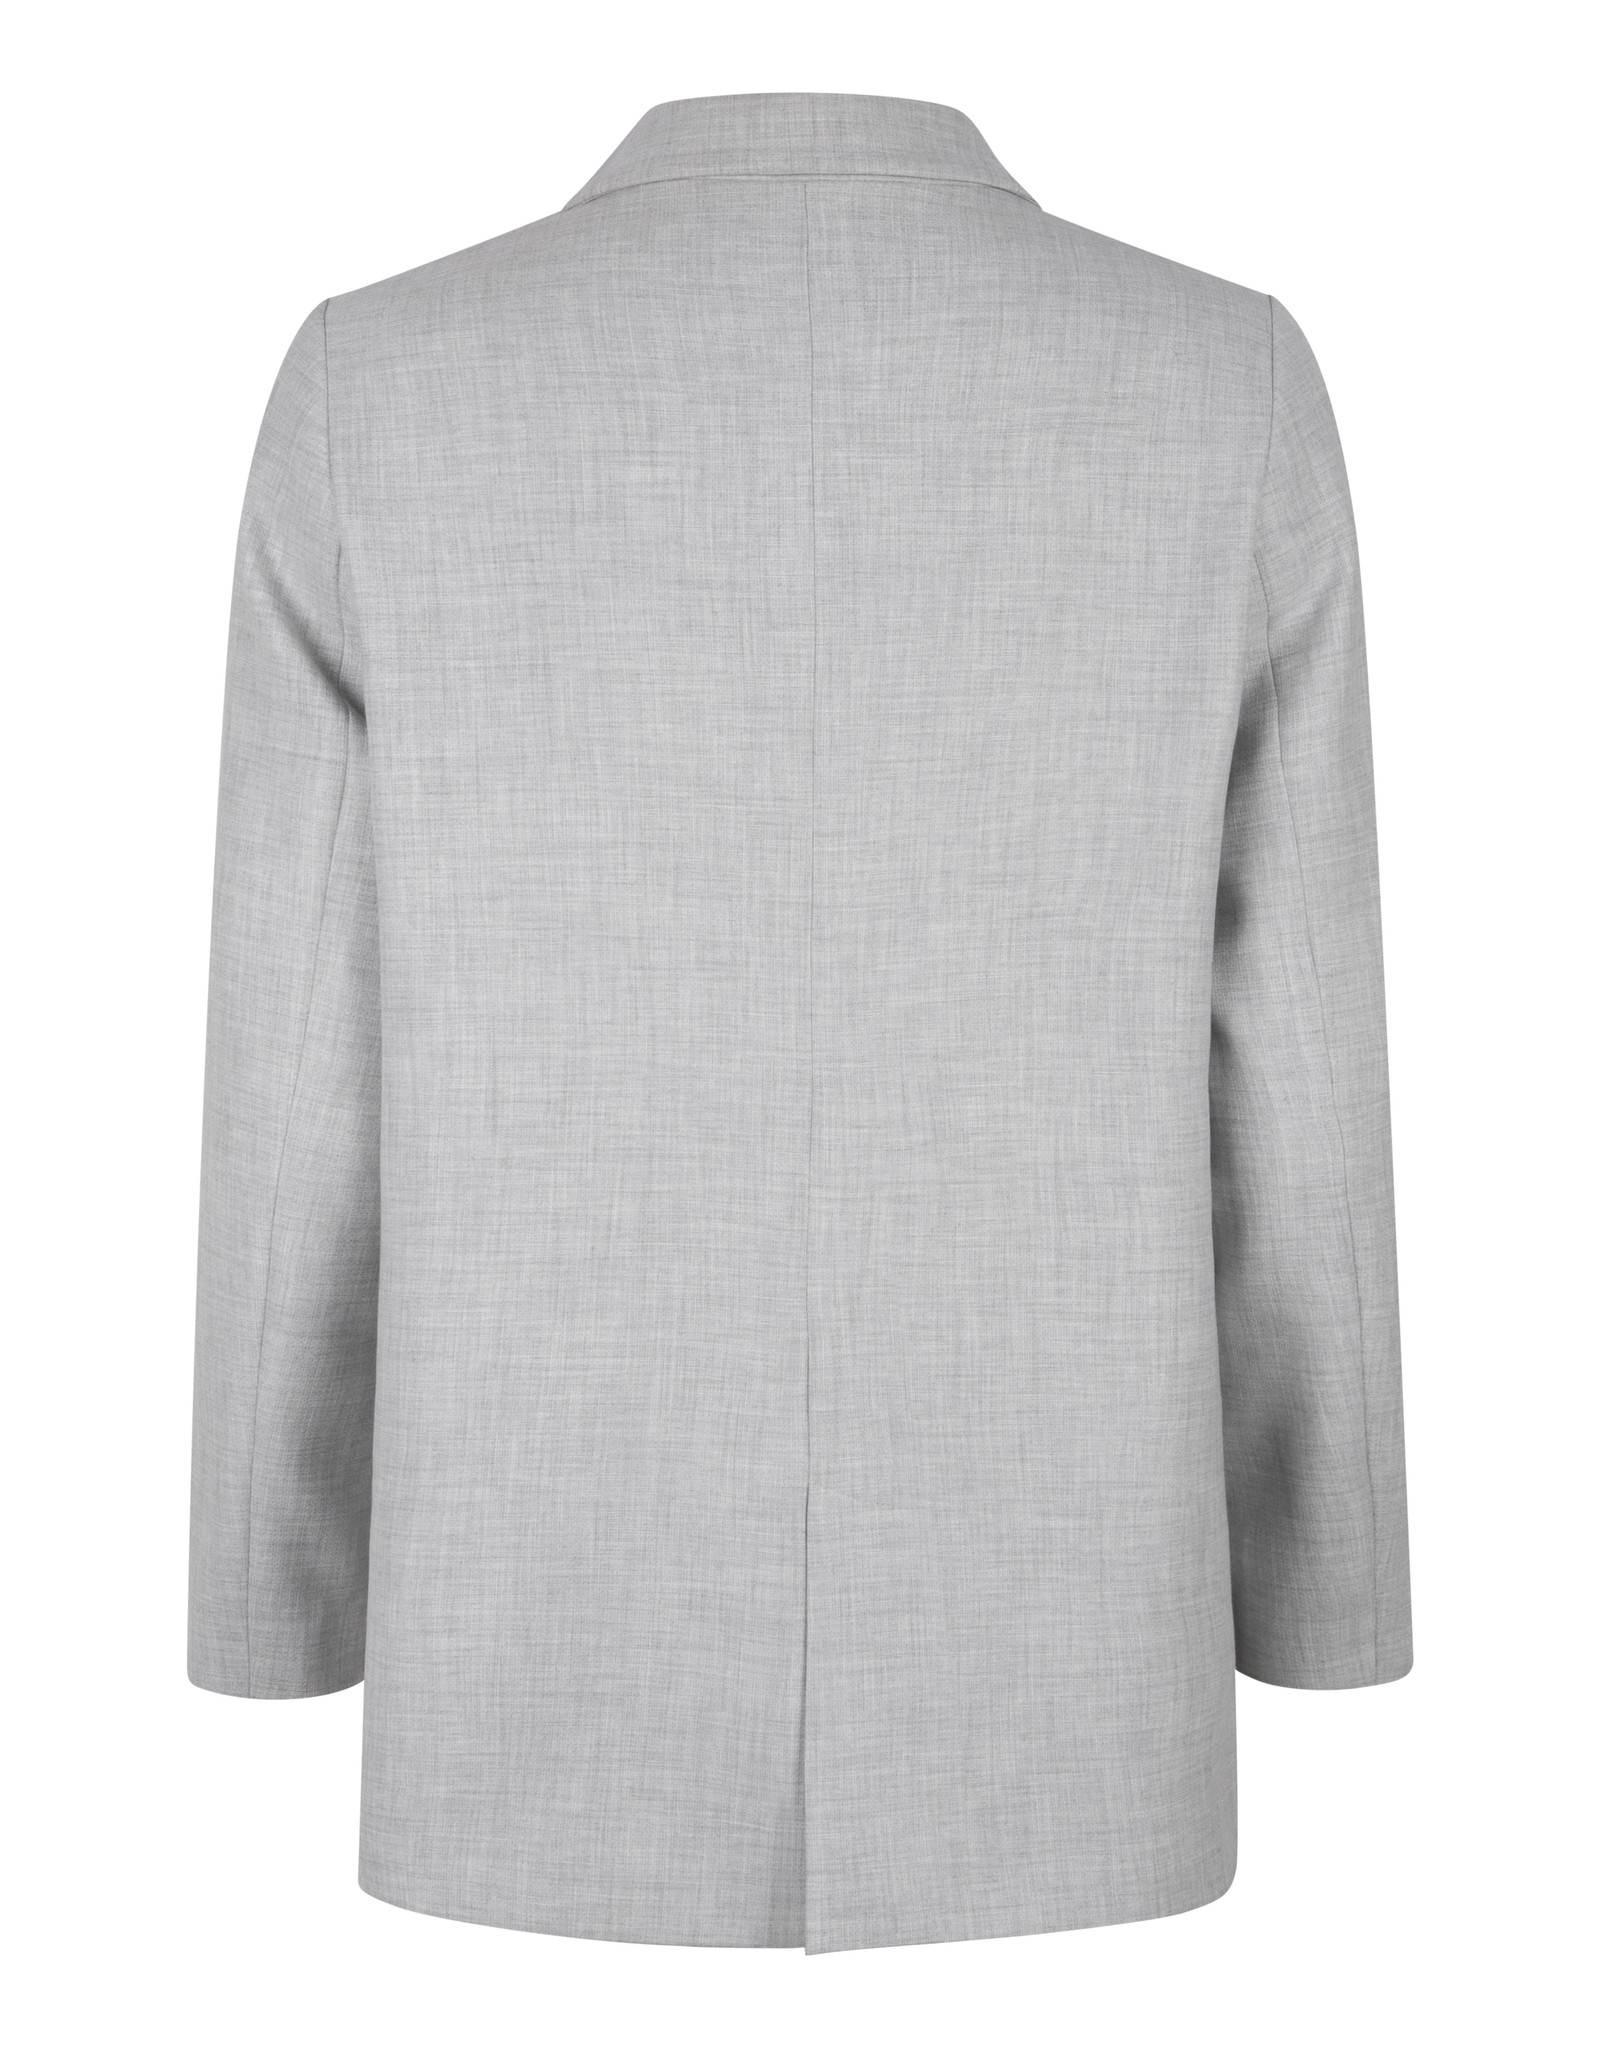 Ruby Tuesday Resai double breasted blazer GREY MELANGE